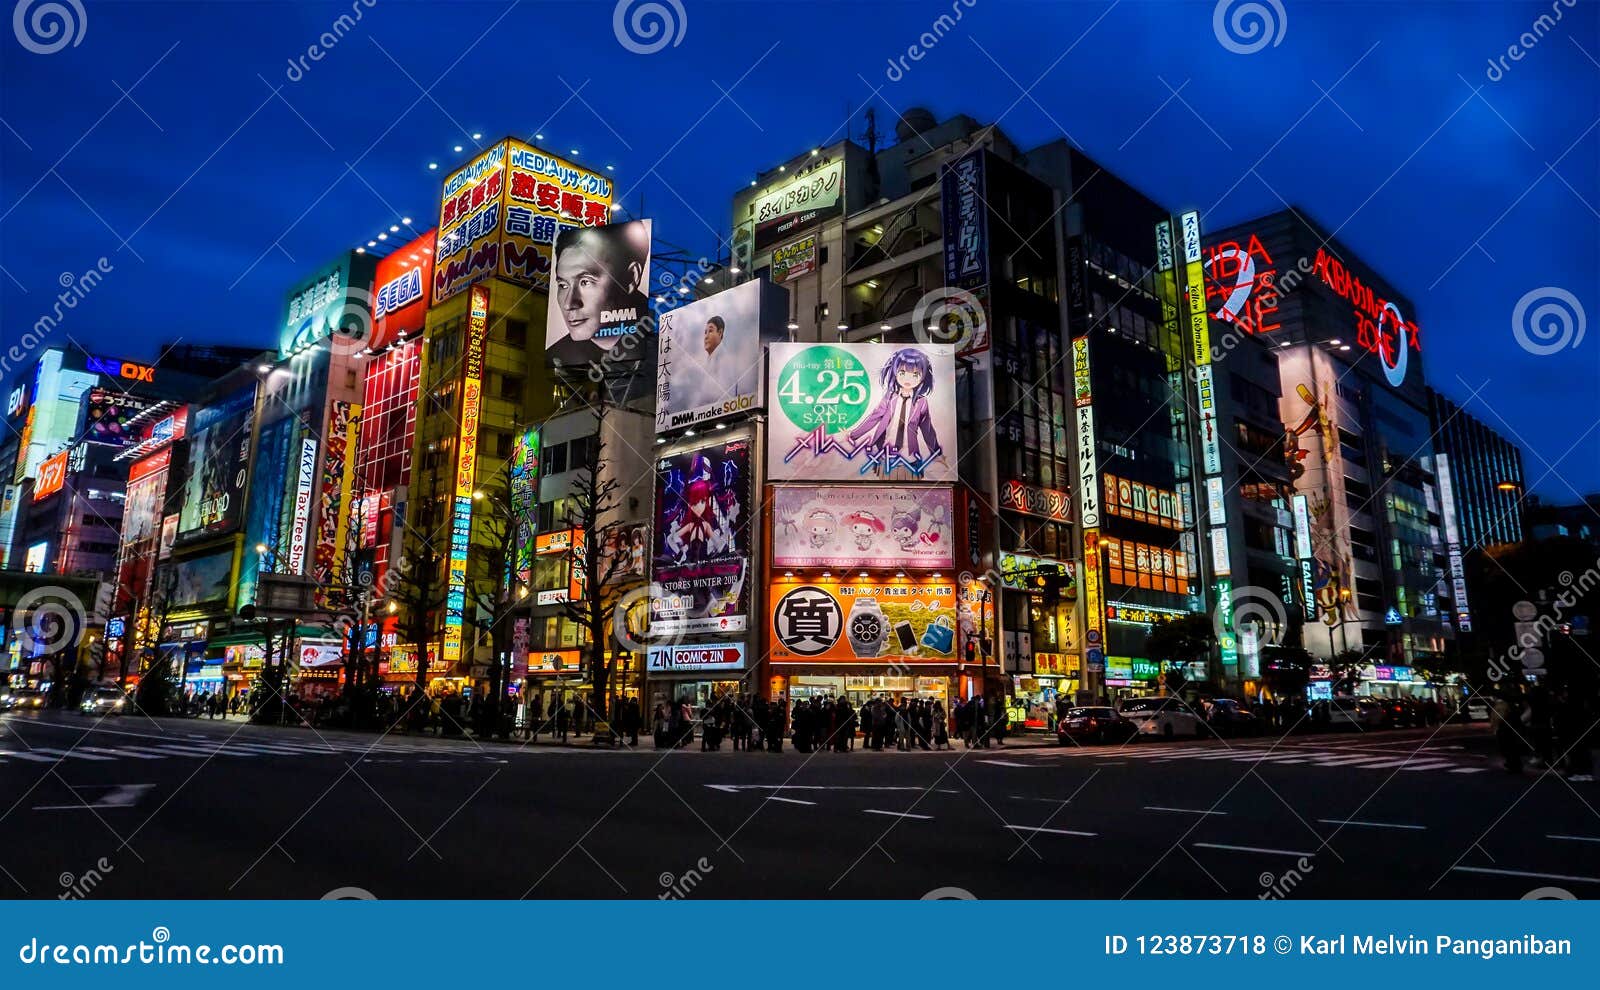 Akihabara A Place Where You Can Buy Your Favorite Anime Related Stuffs Editorial Stock Photo Image Of Japan Entertainment